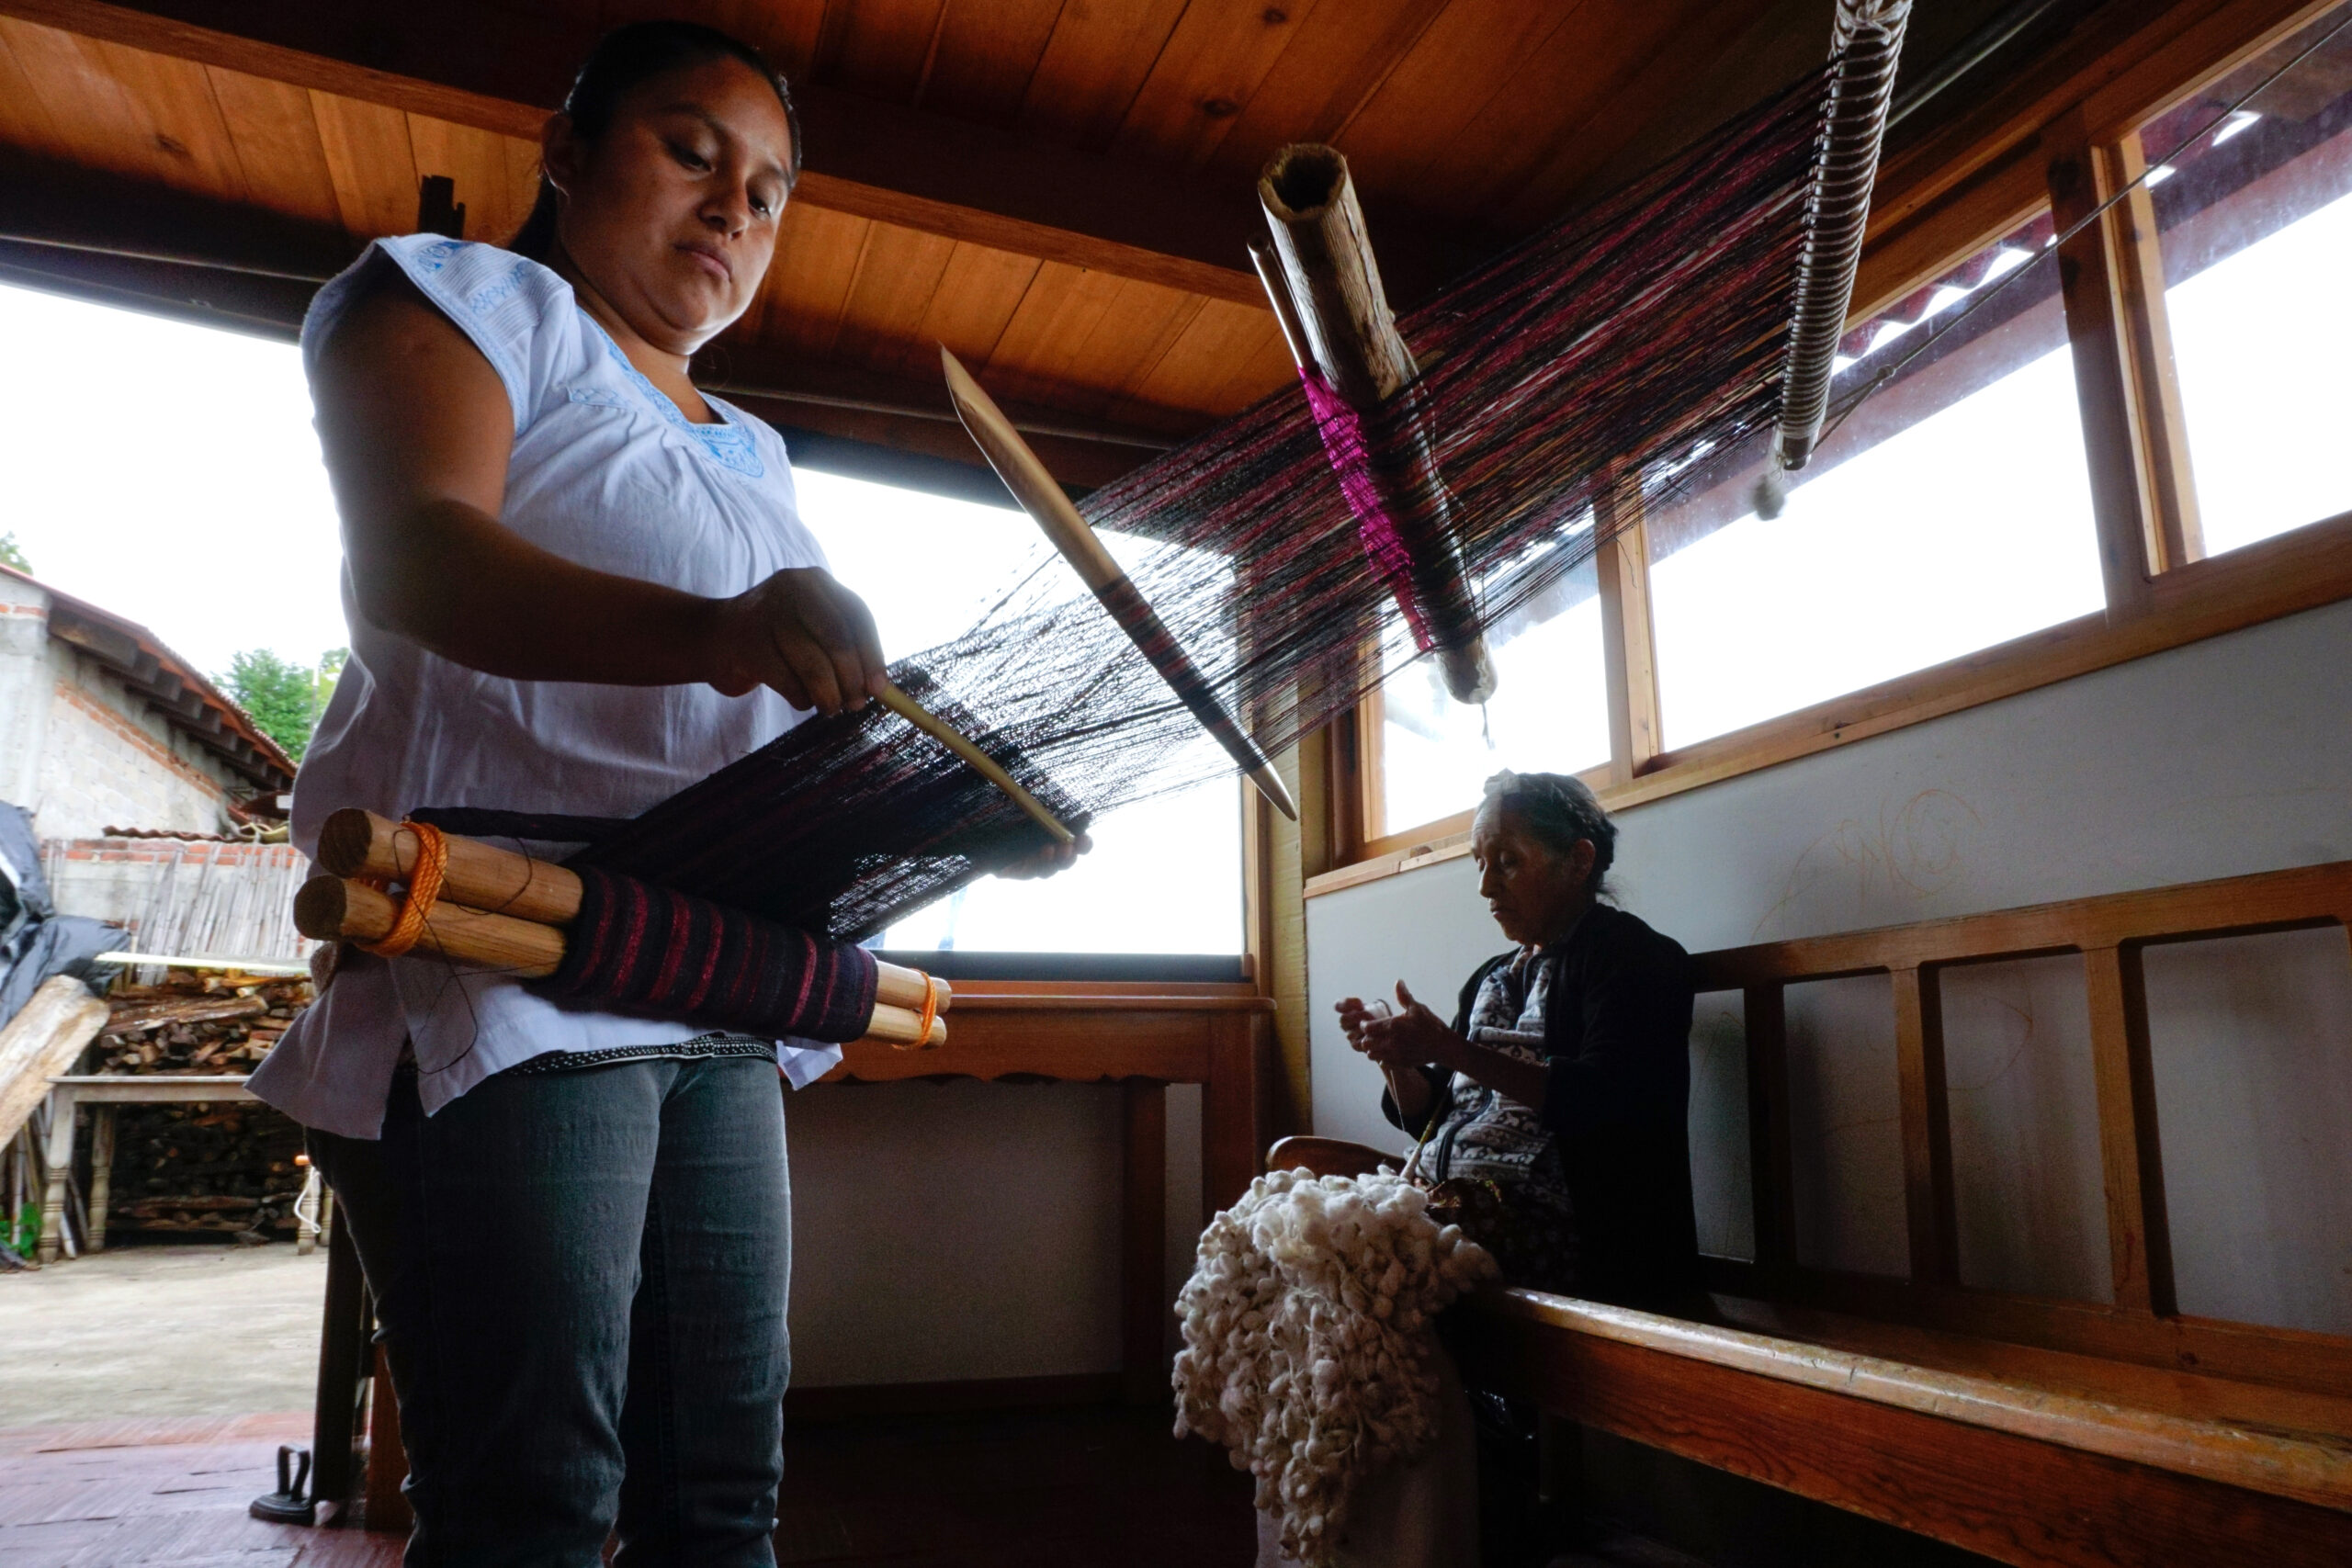 Daysi GarcÌa, left, weaves silk on a backstrap loom while her grandmother, Margarita Flores, spins silk thread at MoisÈs MartÌnezís family workshop in San Pedro Cajonos, Mexico, on Nov. 13, 2022. Their building is a simple wooden one with big windows, and another loom is visible outside.